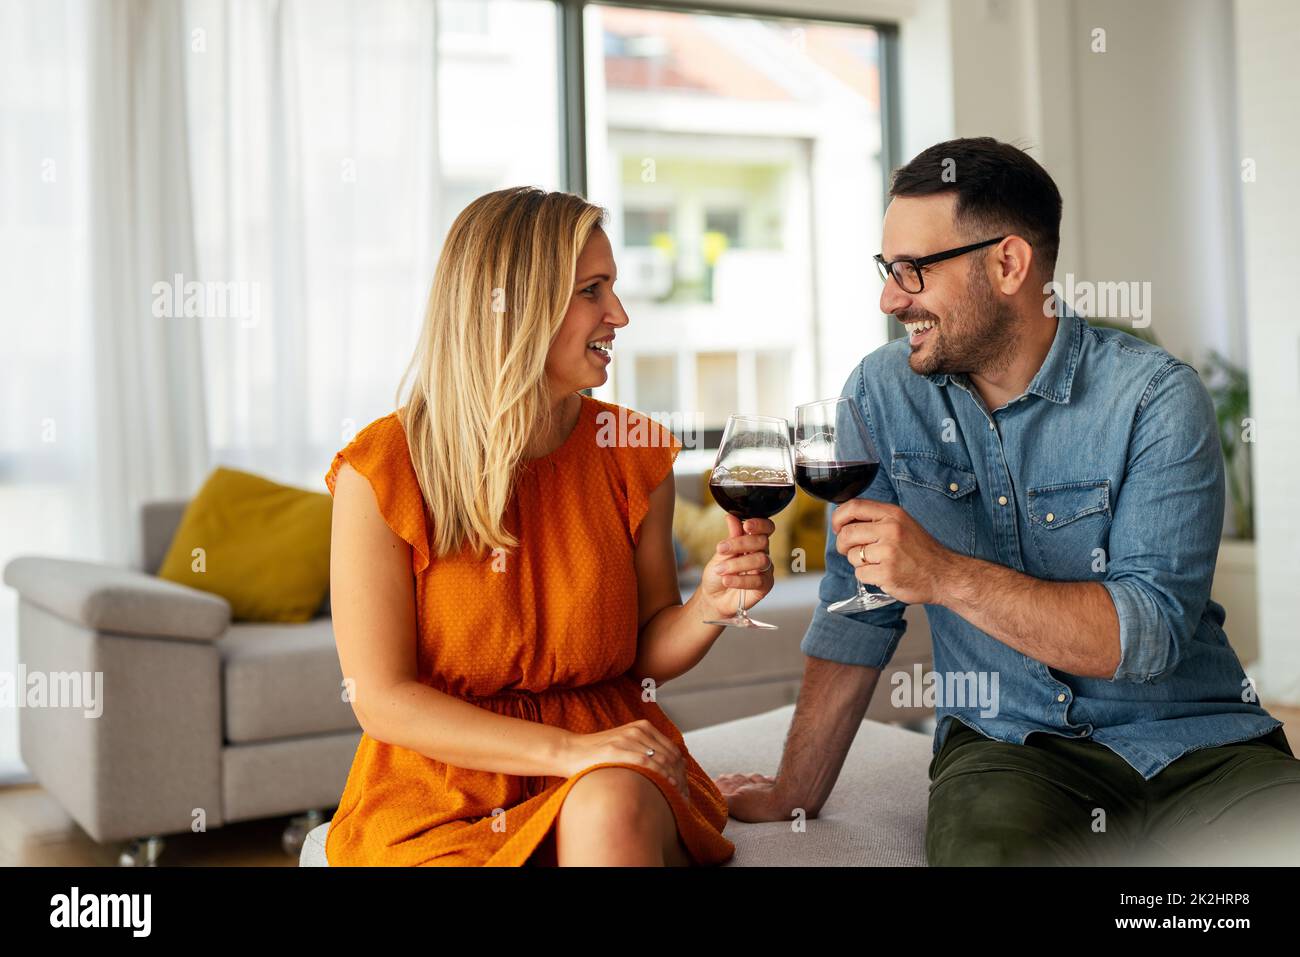 Happy couple having a romantic date and drinking wine. Couple love romance concept. Stock Photo